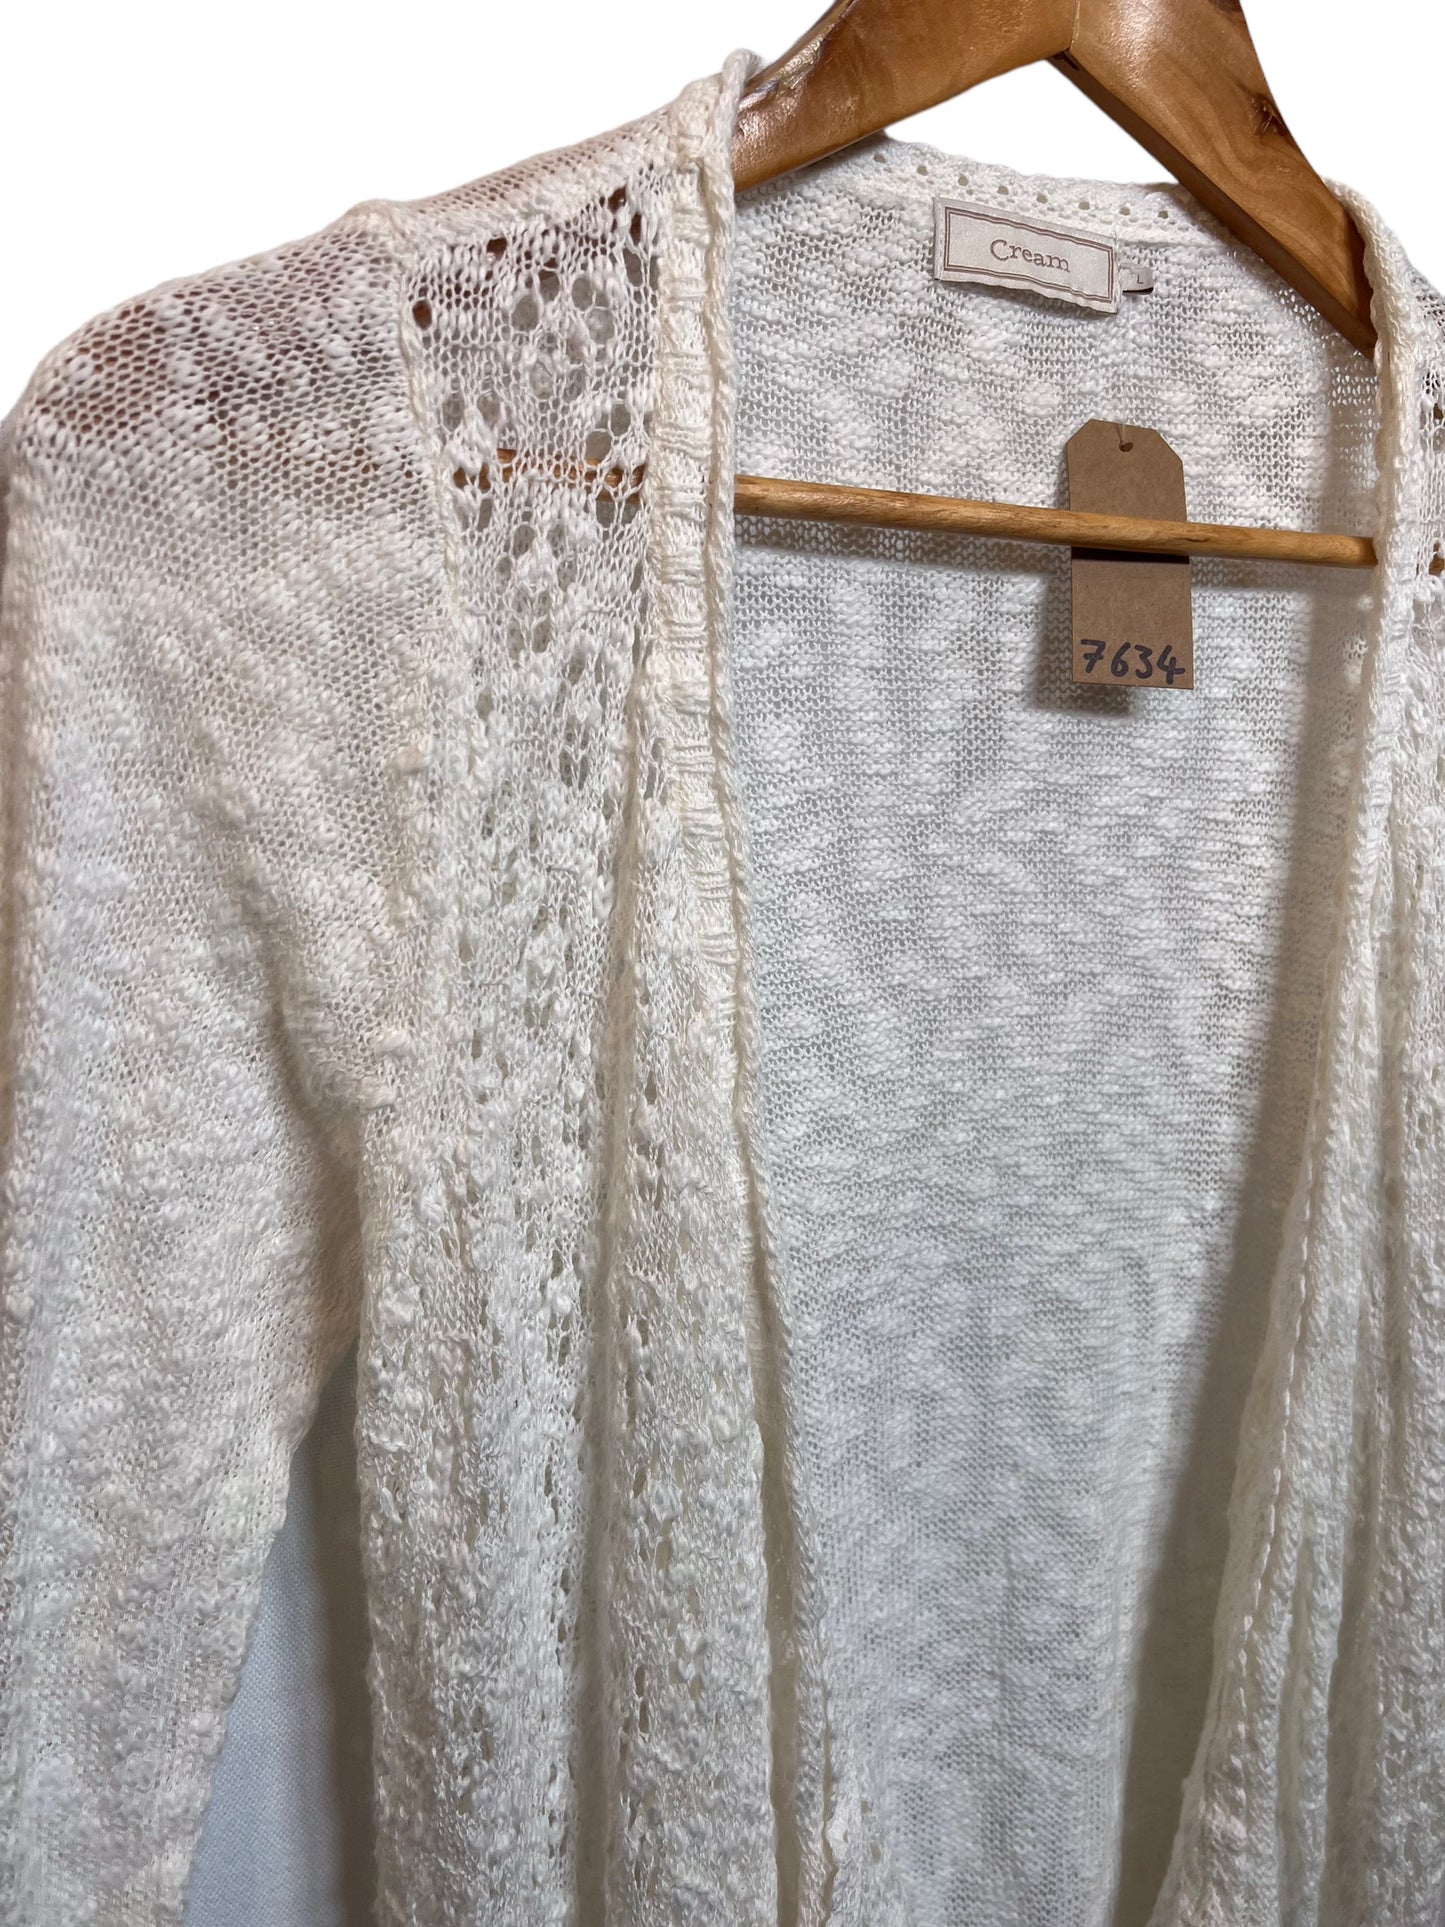 Cream Women’s Cream coloured Knitted Open Cardigan (Size L)